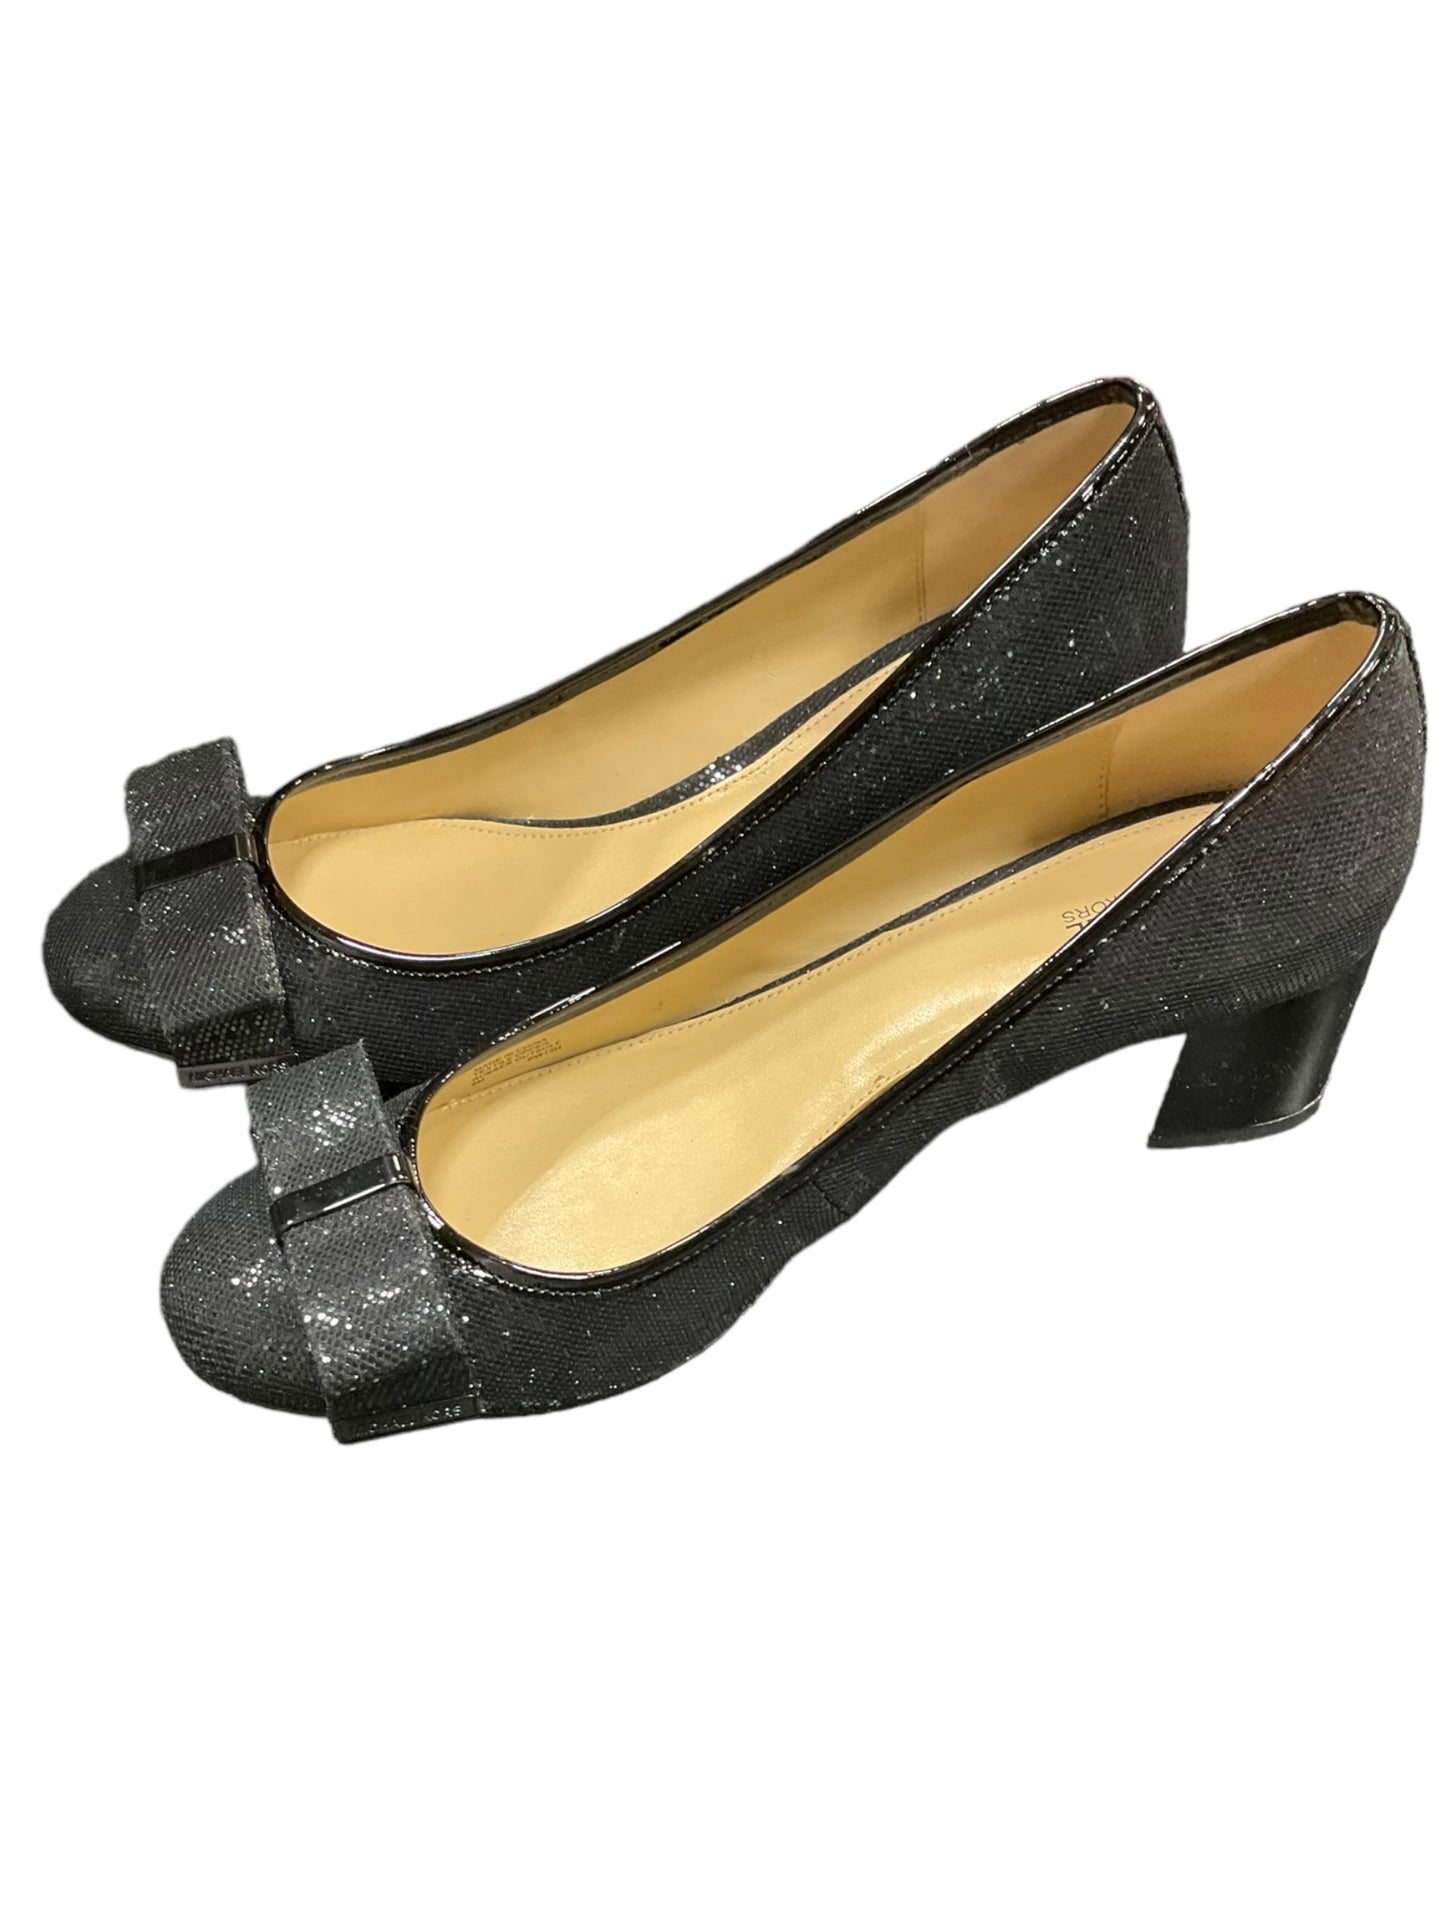 Shoes Heels Block By Michael By Michael Kors  Size: 9